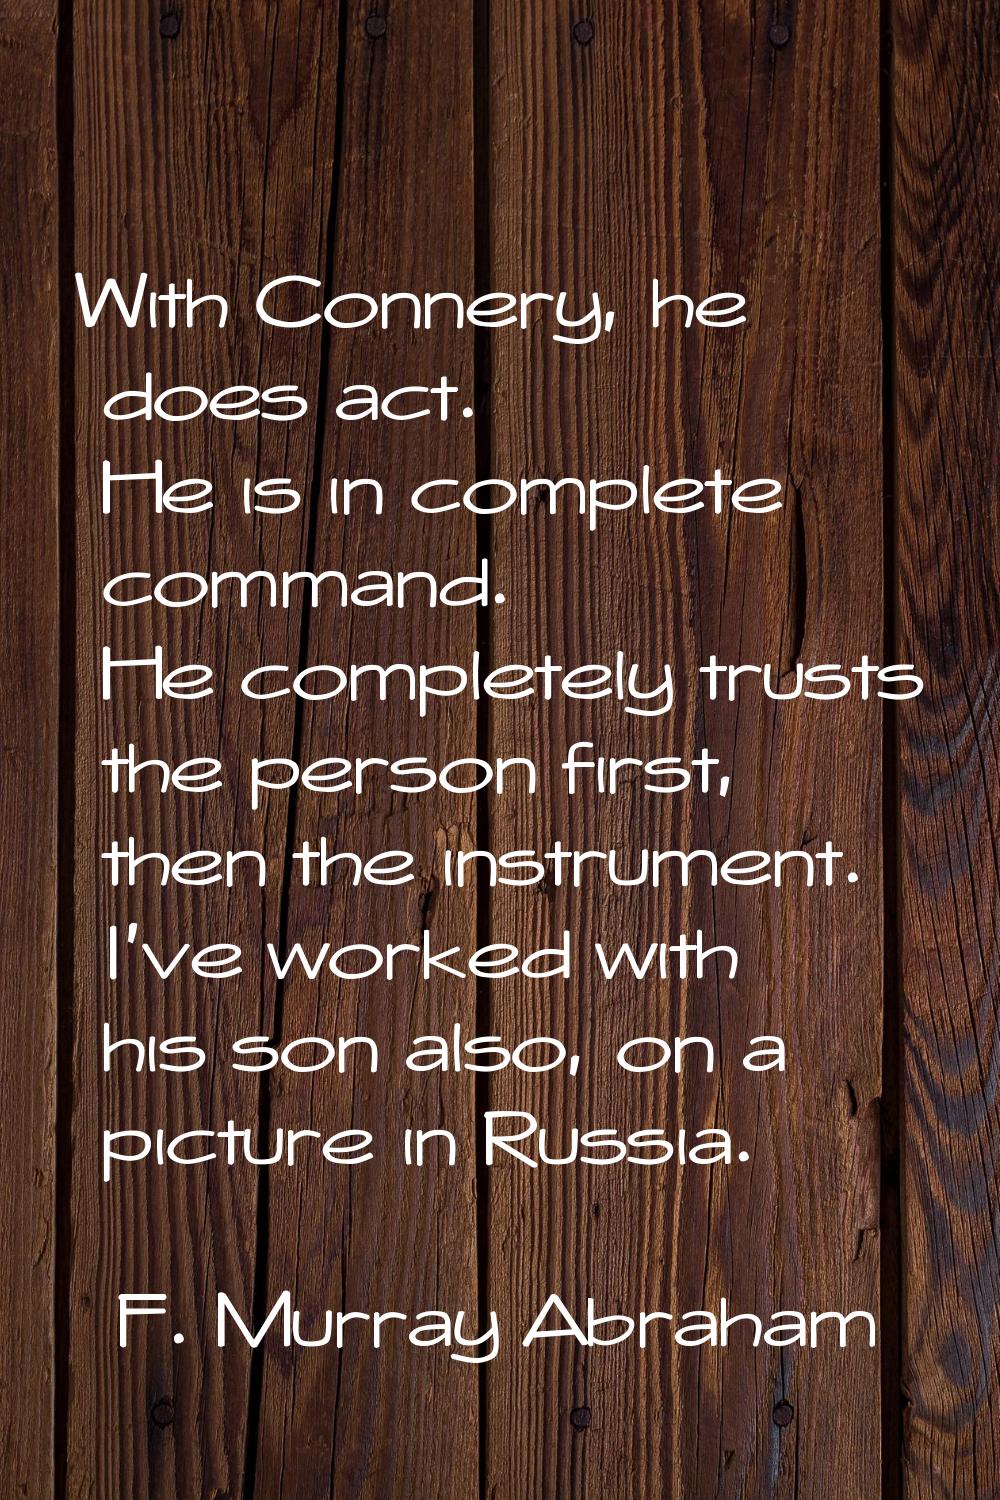 With Connery, he does act. He is in complete command. He completely trusts the person first, then t